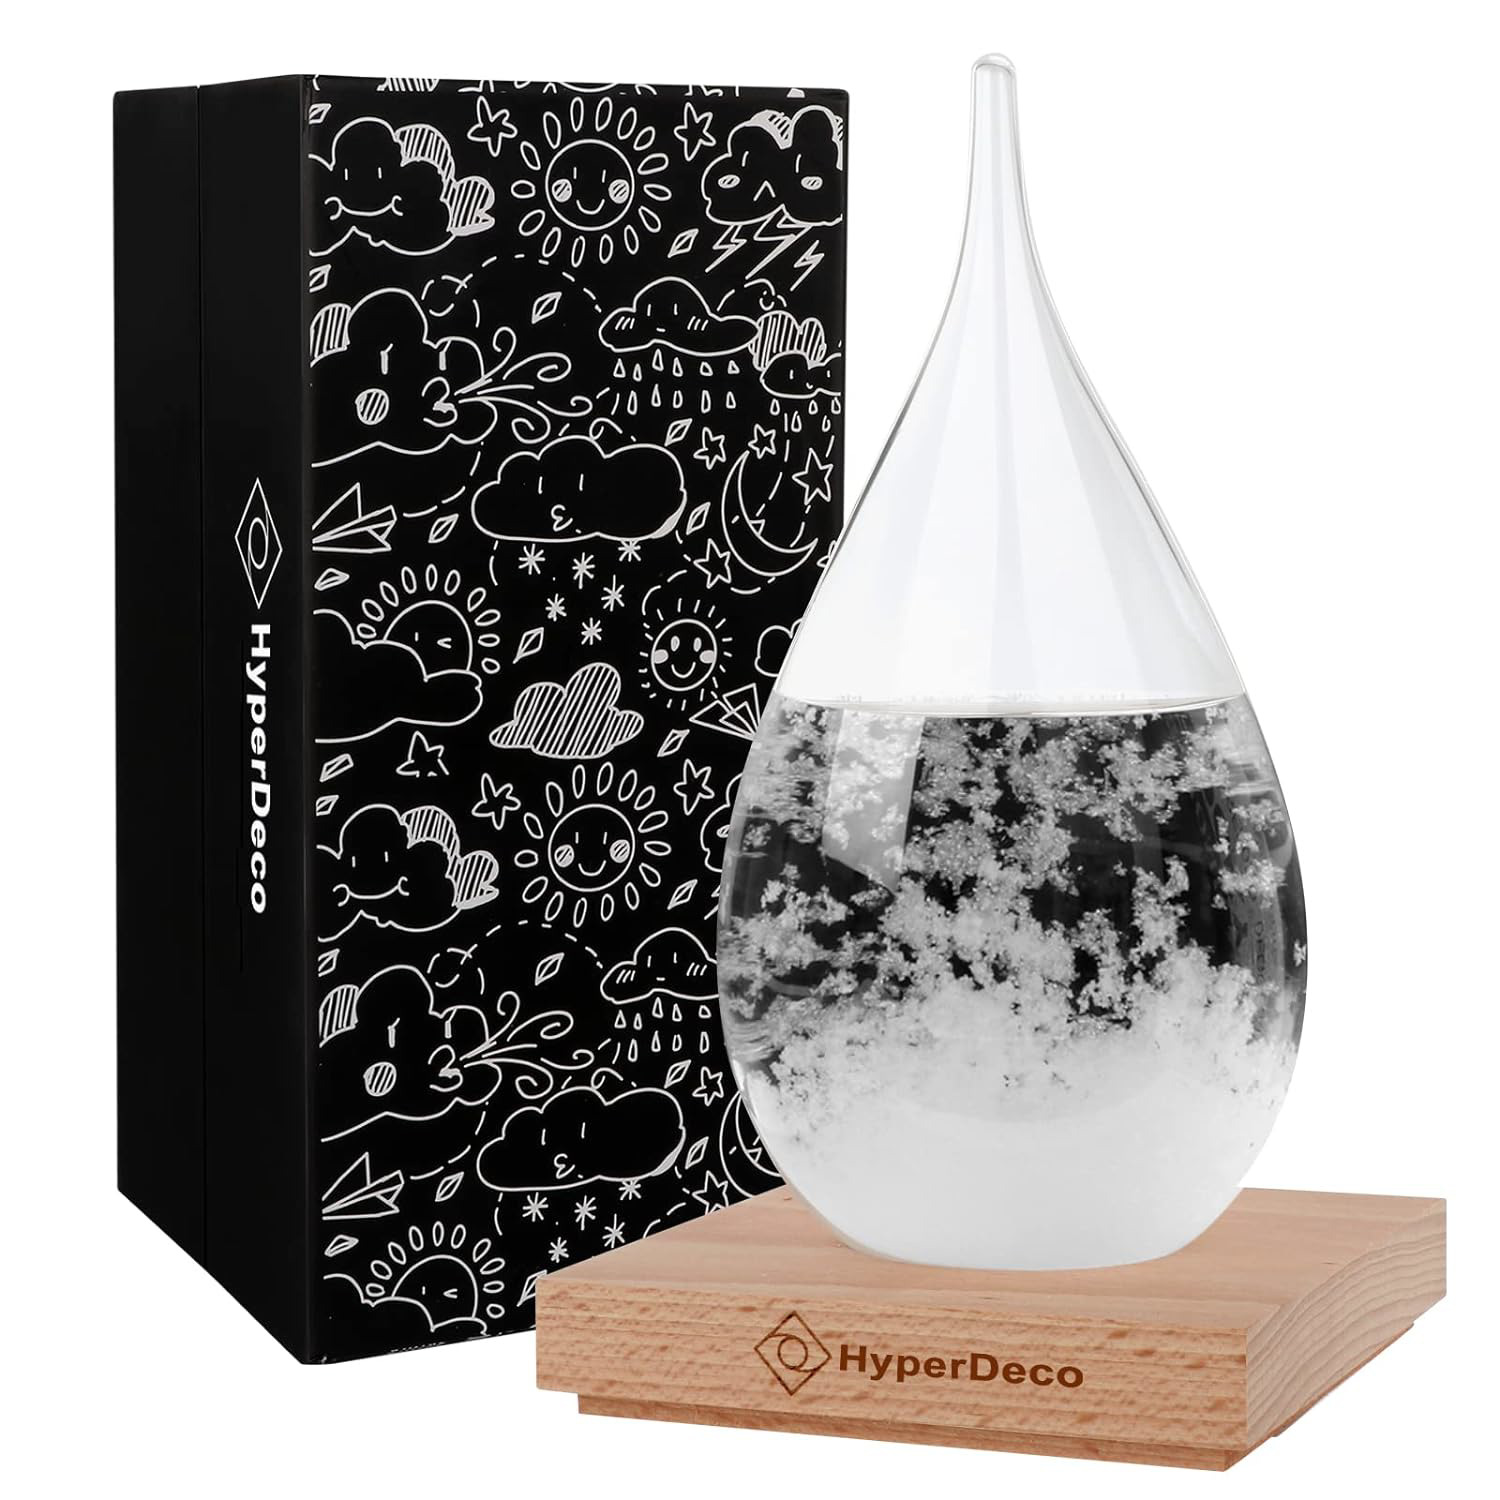 Storm Glass Weather Predictor, Weather Predicting Globe Storm Glass Cloud Water